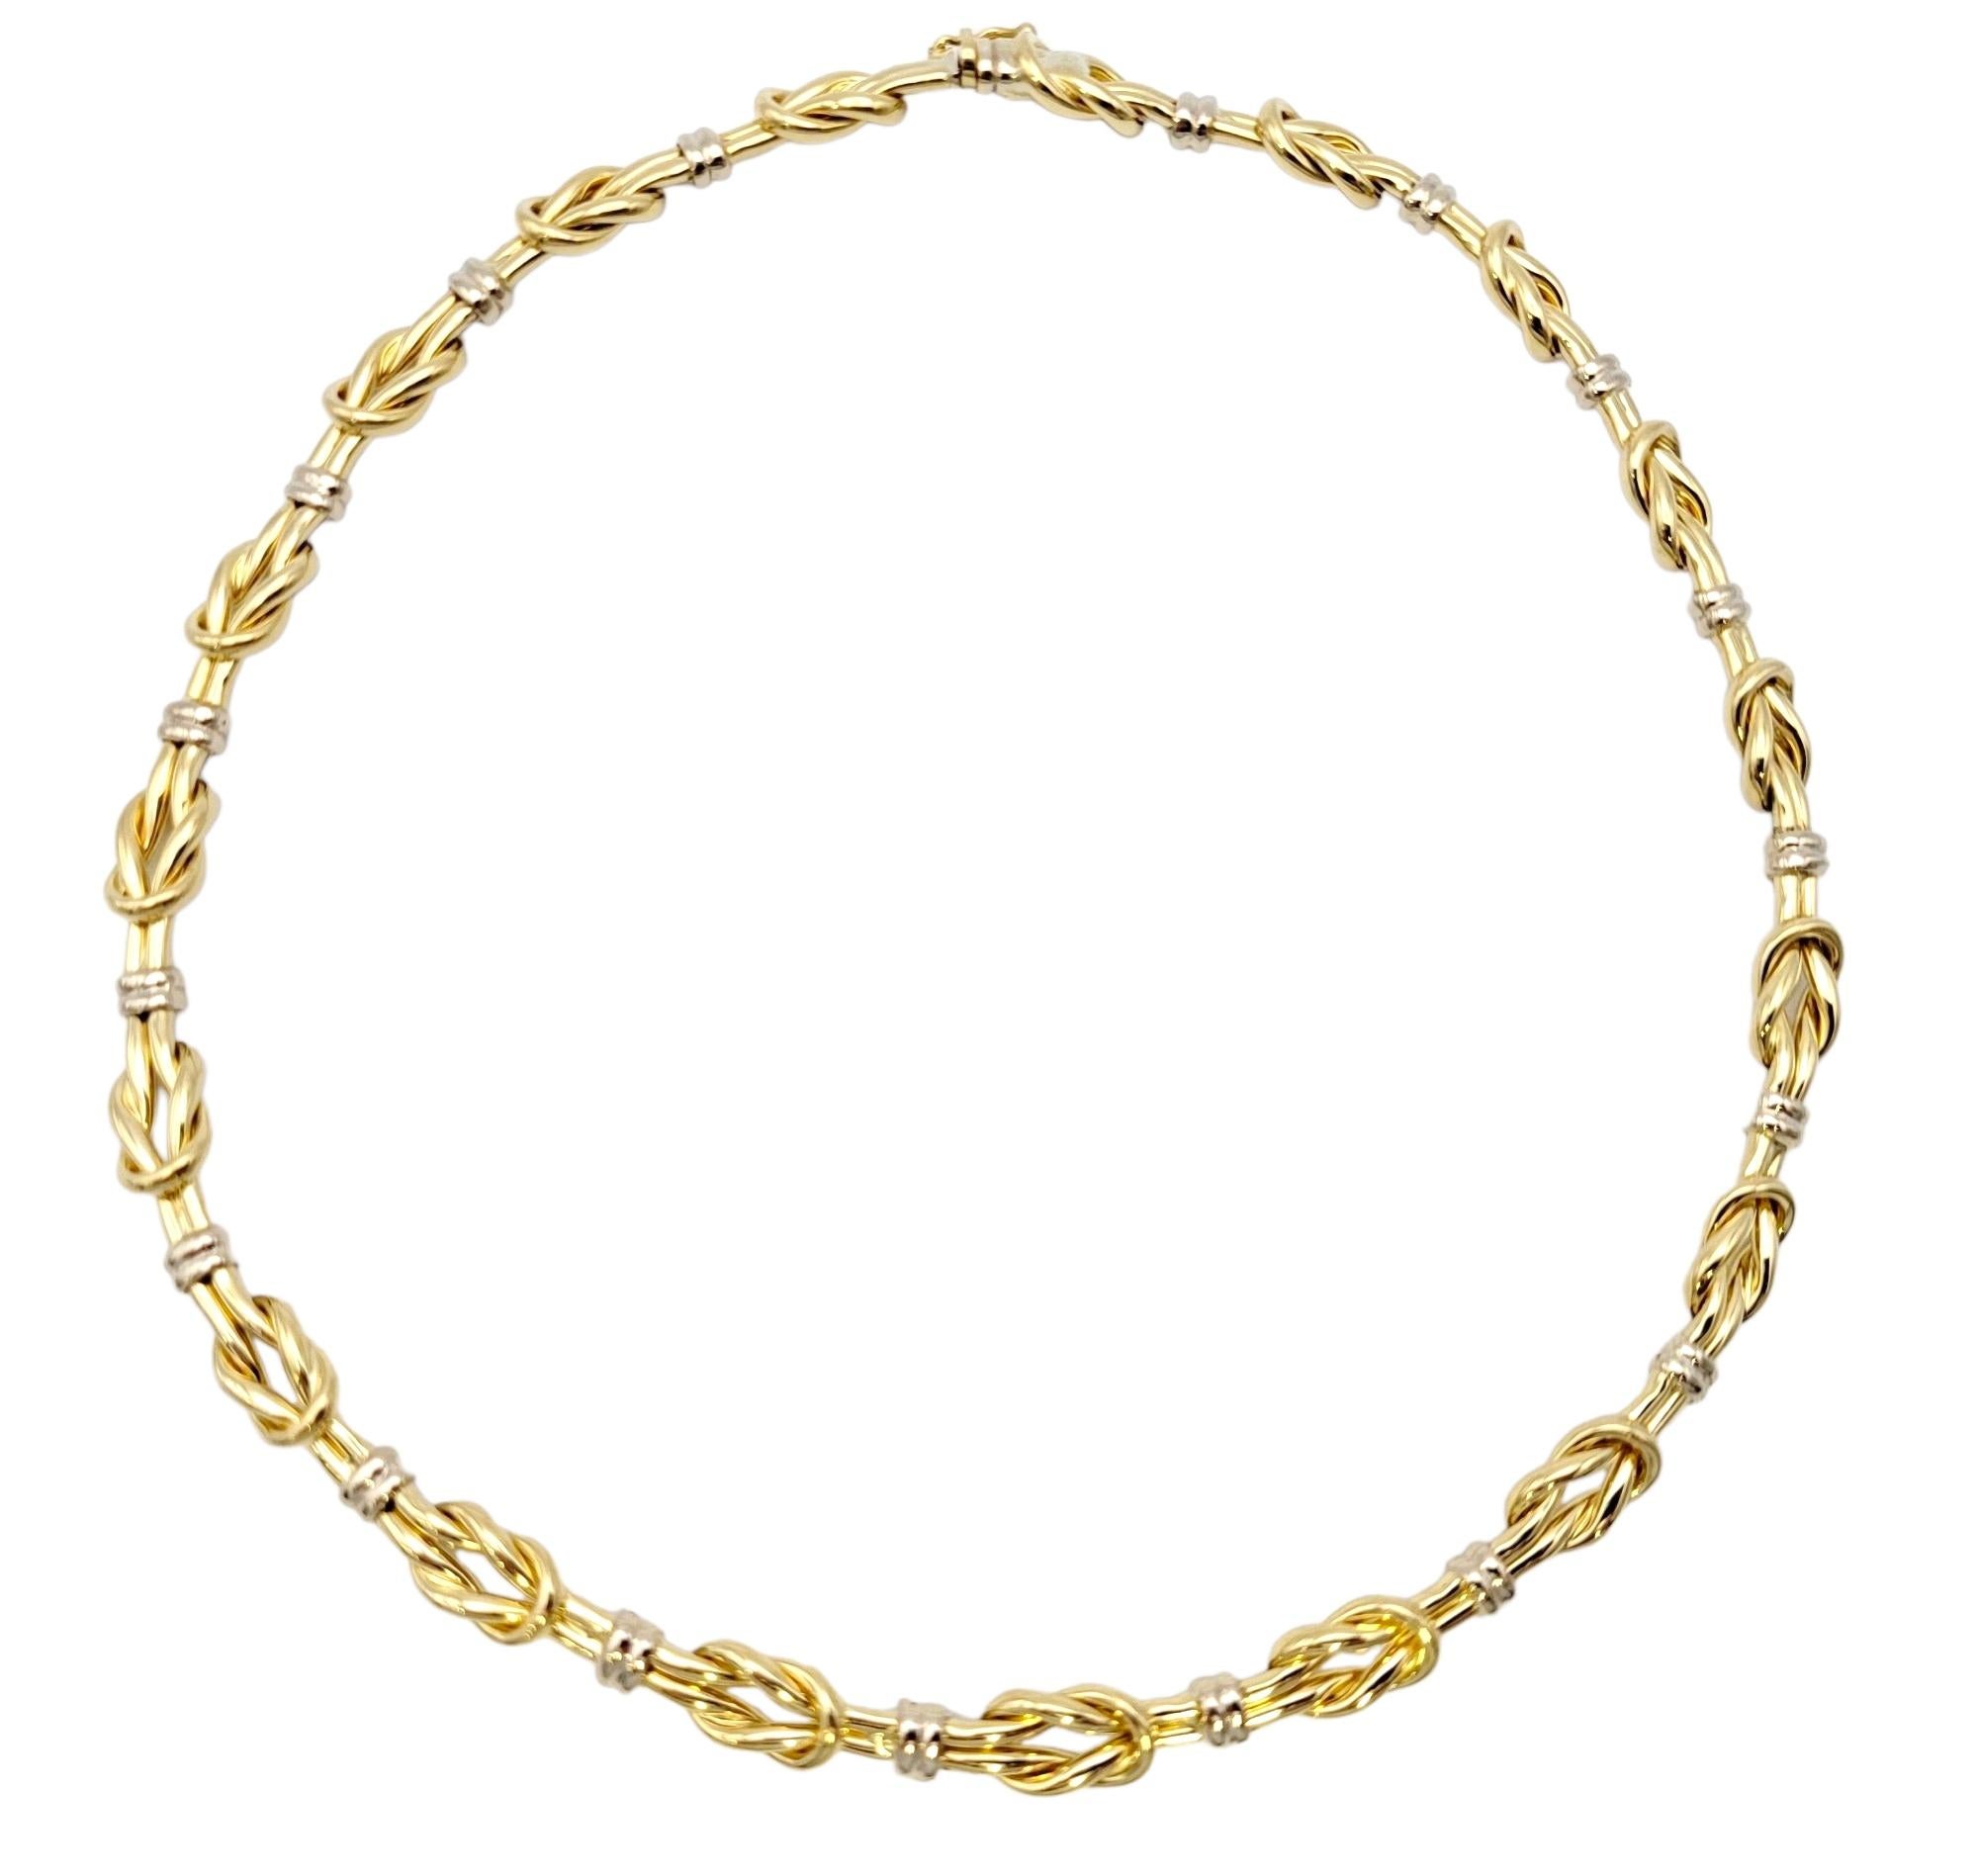 Contemporary Roberto Coin Reef Knot Two-Tone Polished 18 Karat Gold Collar Necklace  For Sale